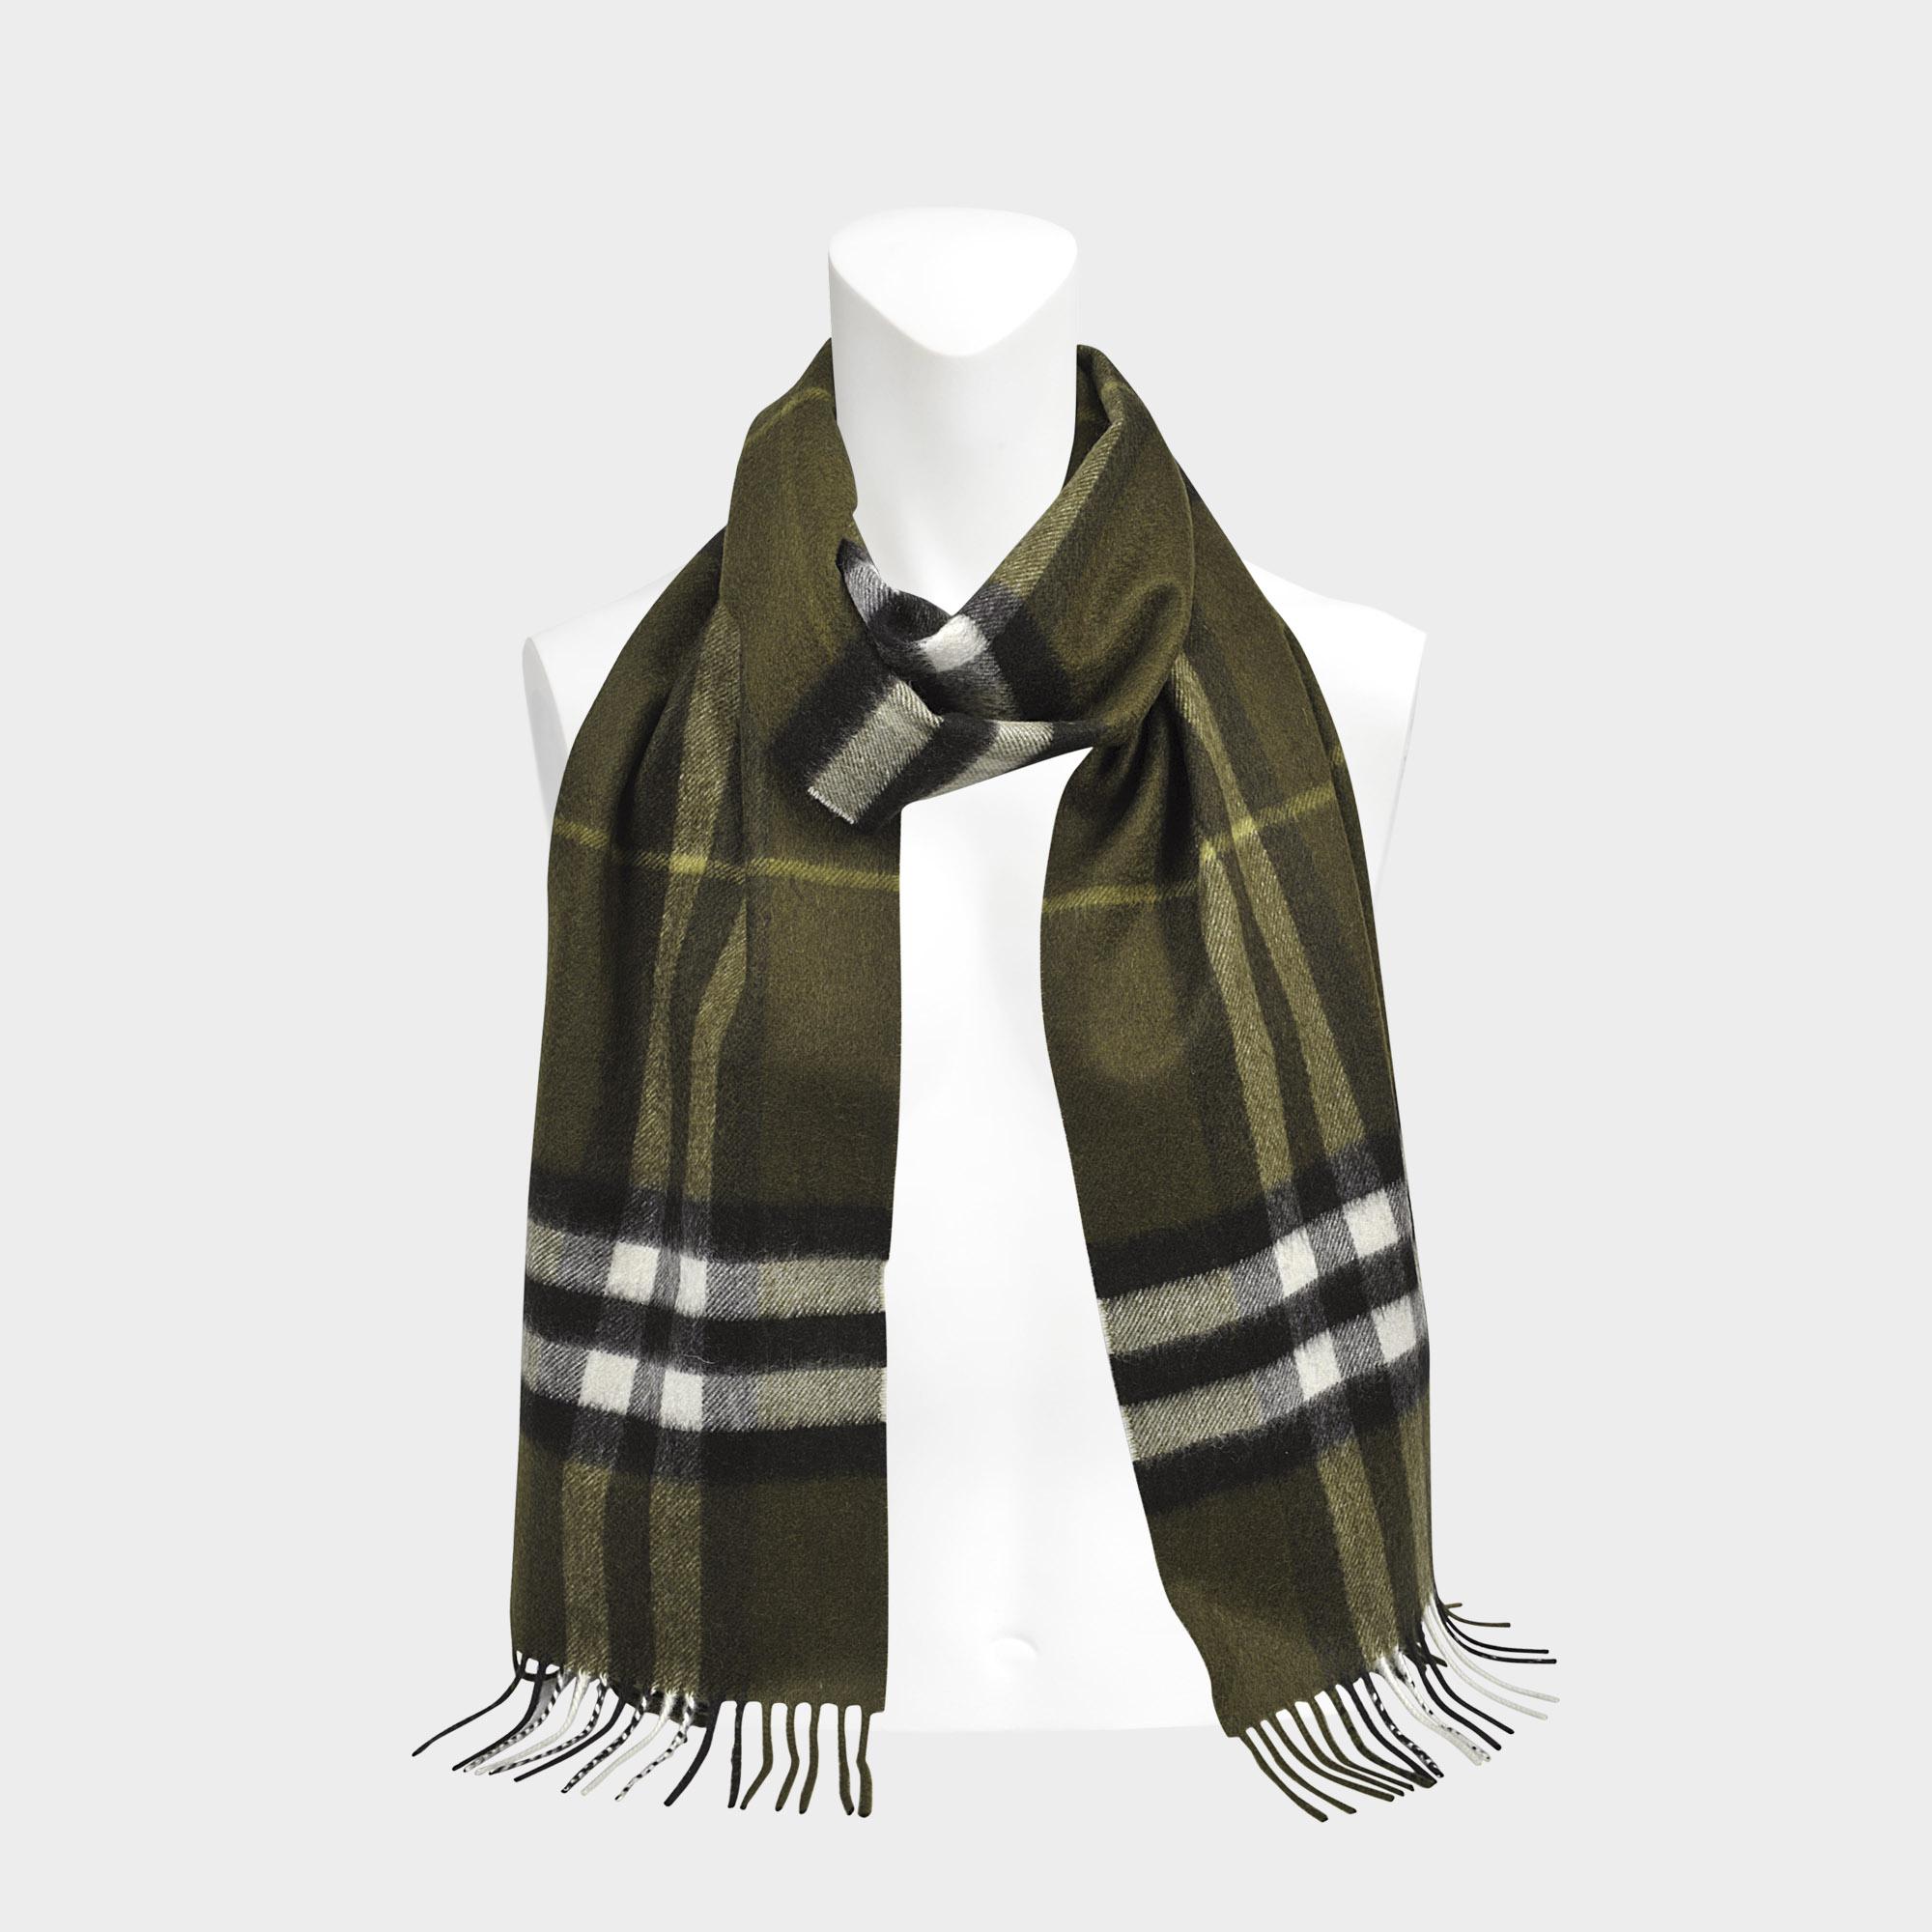 Bange for at dø Arving Bemyndigelse Burberry Cashmere Giant Icon Scarf 168x130 Cm in Green - Lyst